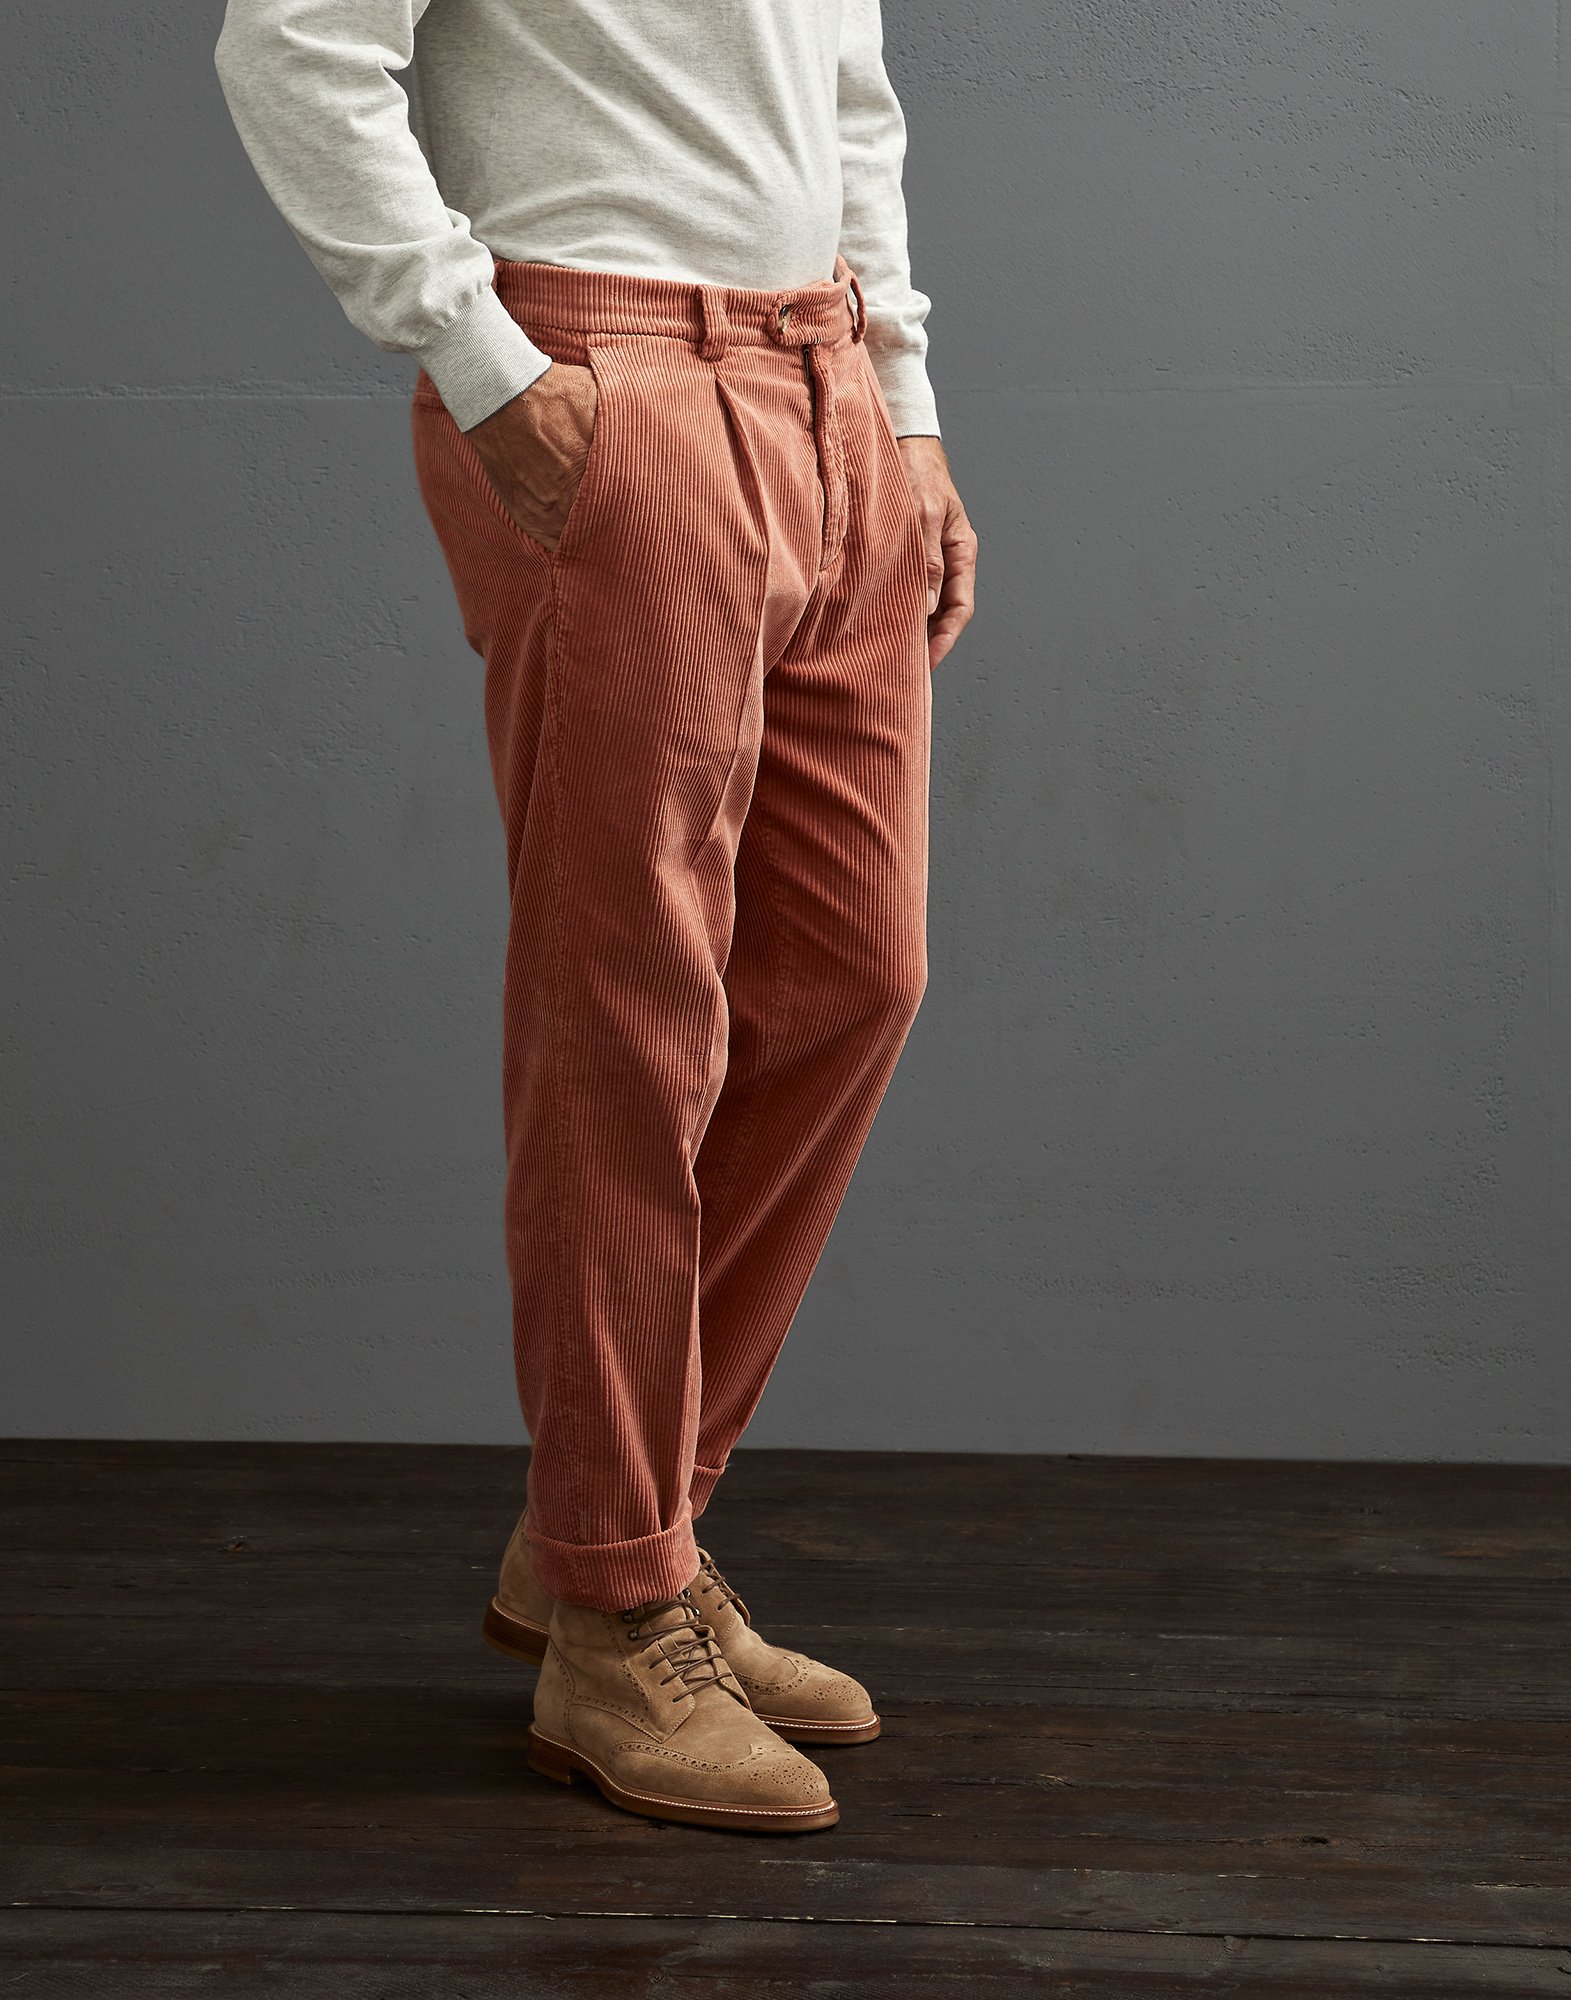 Mens Trousers Slacks and Chinos Brunello Cucinelli Trousers Save 55% Brunello Cucinelli Mens Pants in Blue for Men Slacks and Chinos 